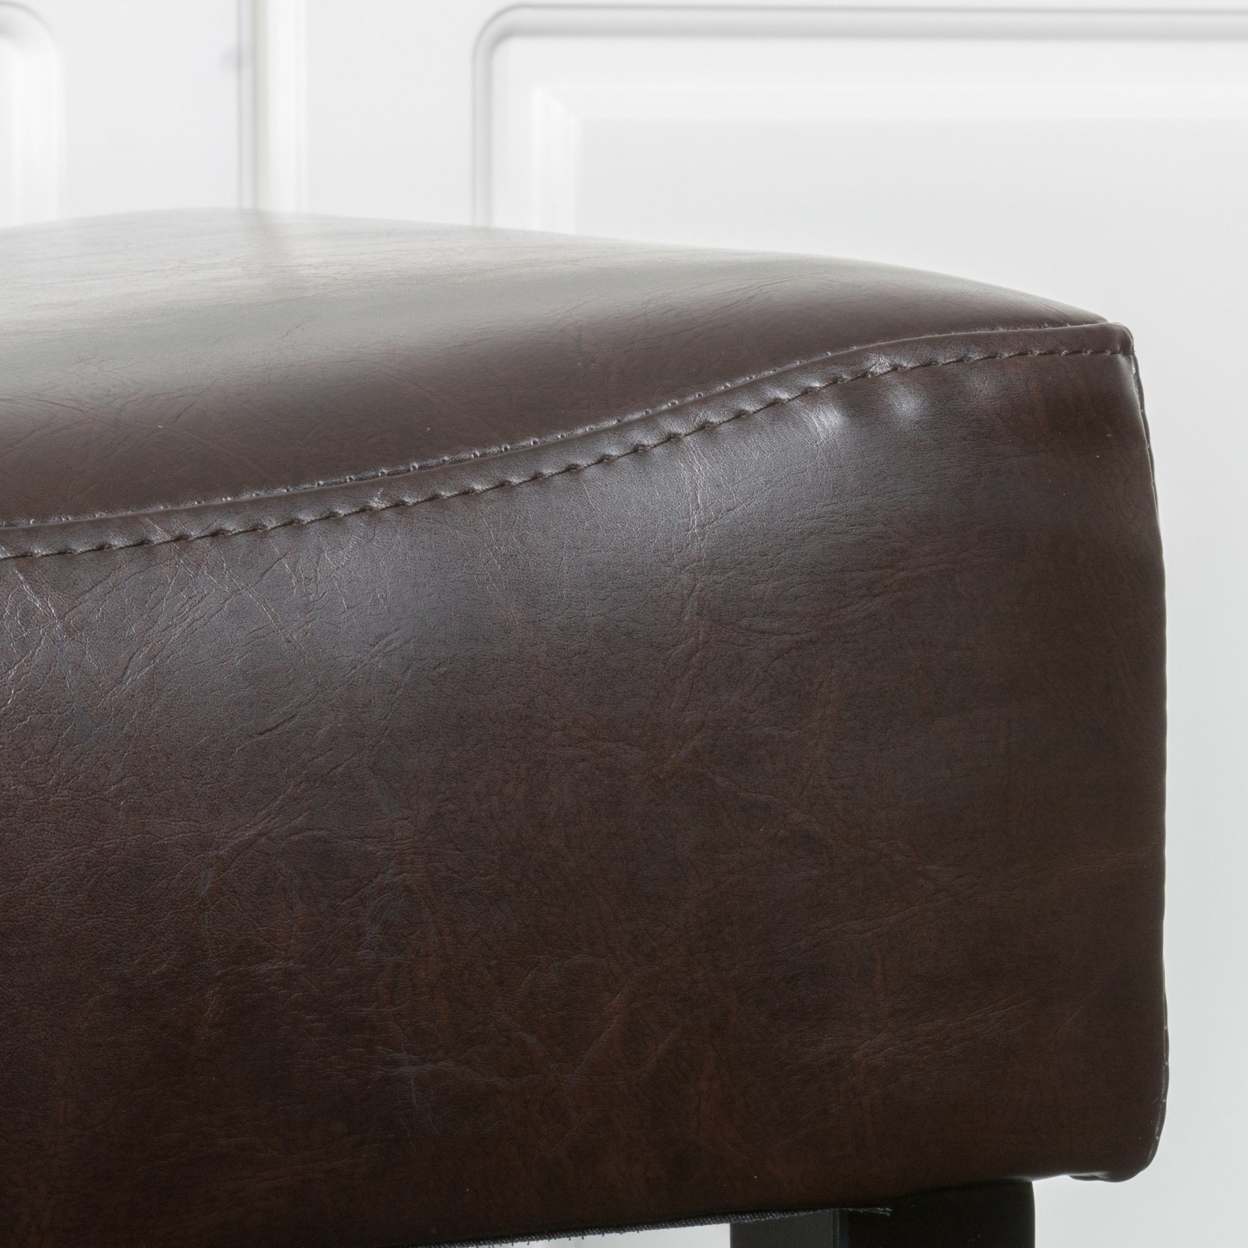 Adler 26-Inch Brown Leather Backless Counter Stool (Set Of 2)